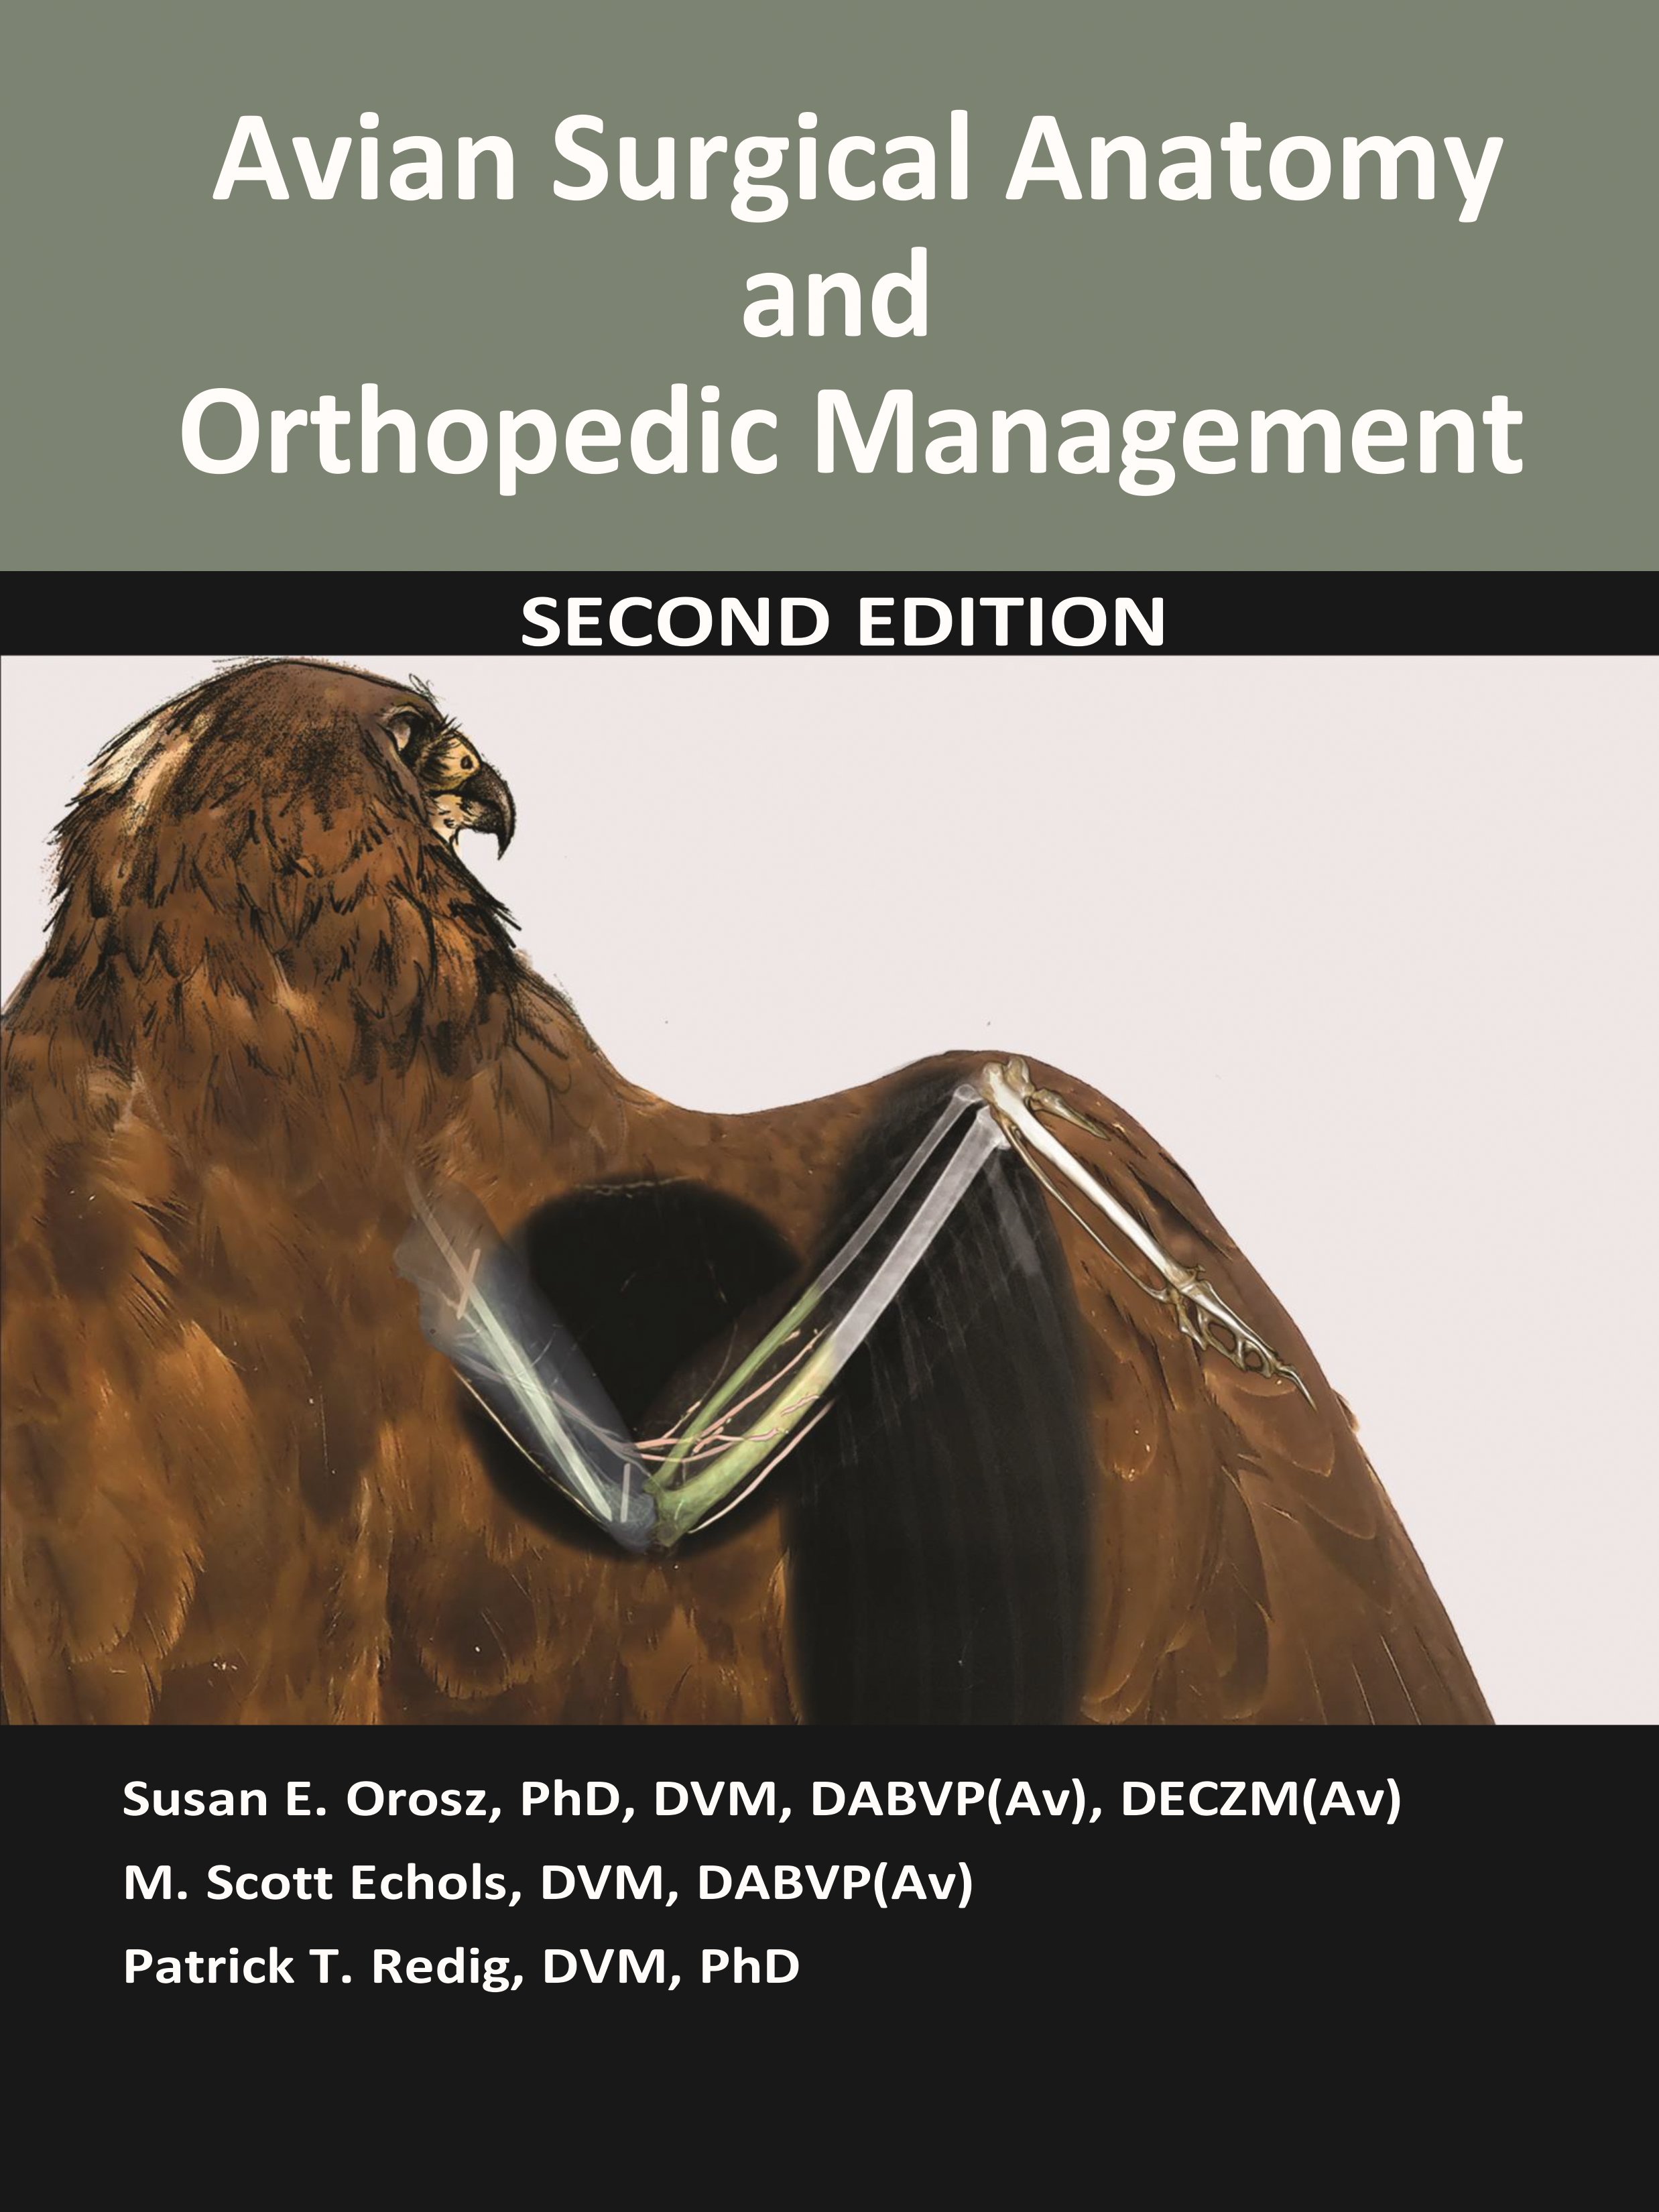 Avian Surgical Anatomy and Orthopedic Management, Second Edition